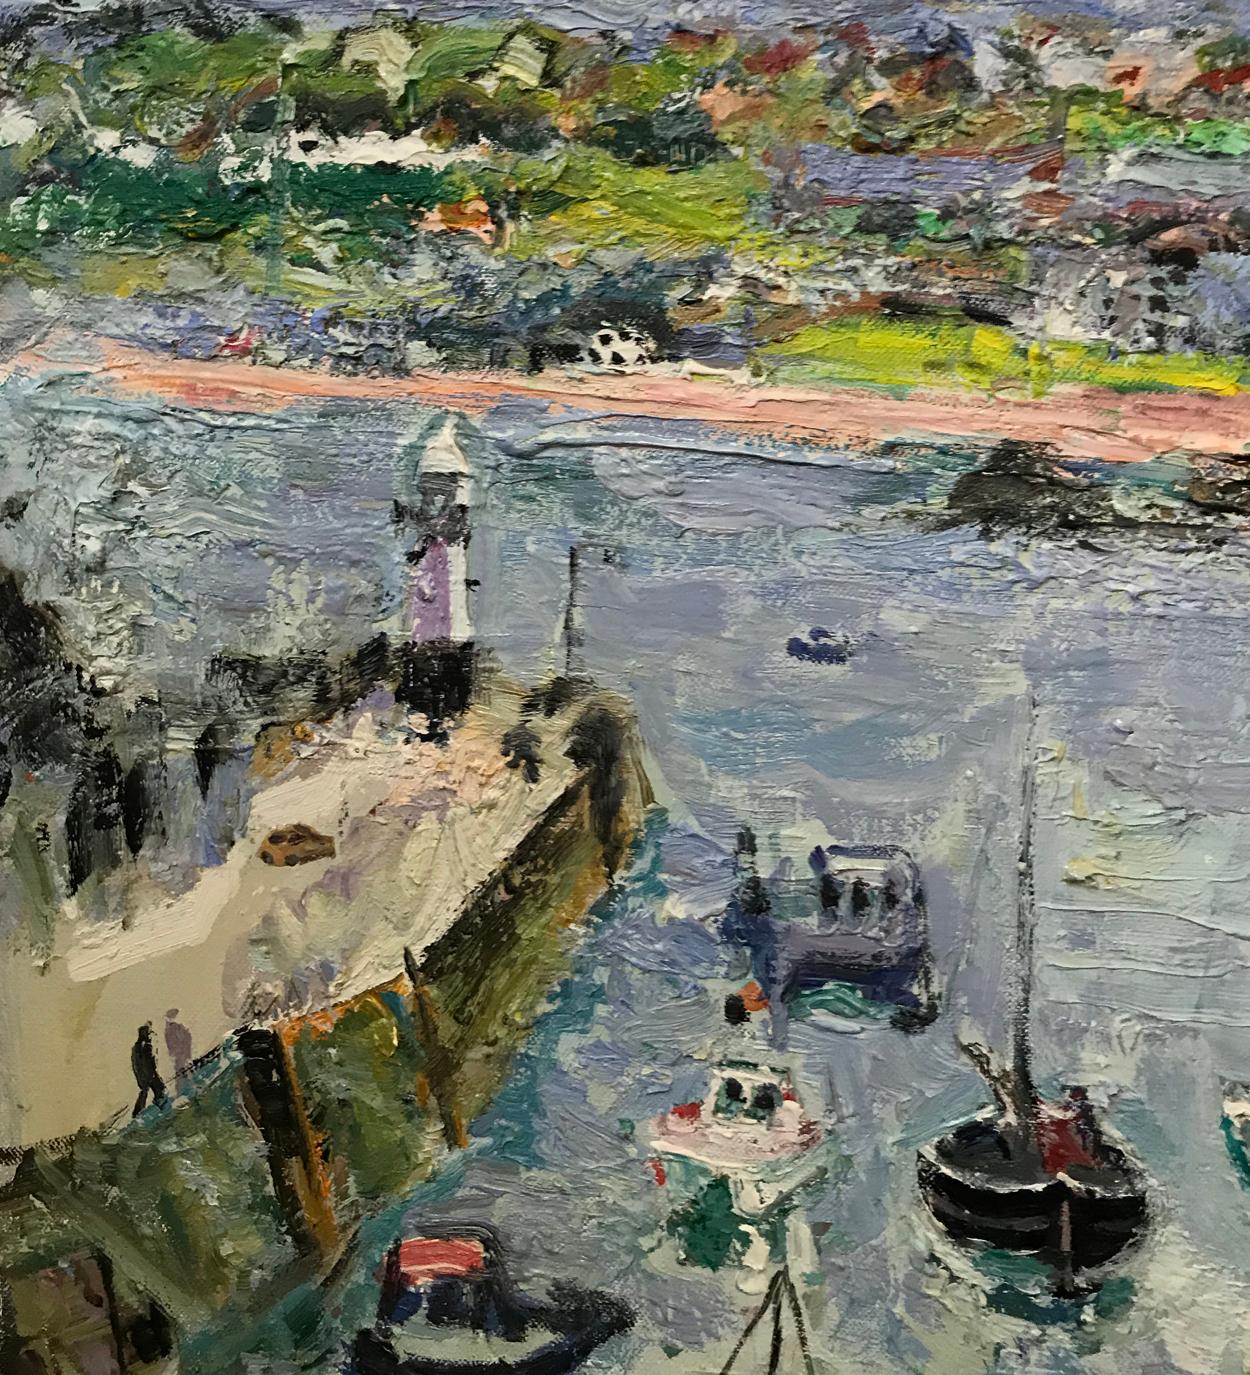 British Linda Weir 'English', St Ives Harbour Cornwall, Oil on Canvas, Painted in 2006